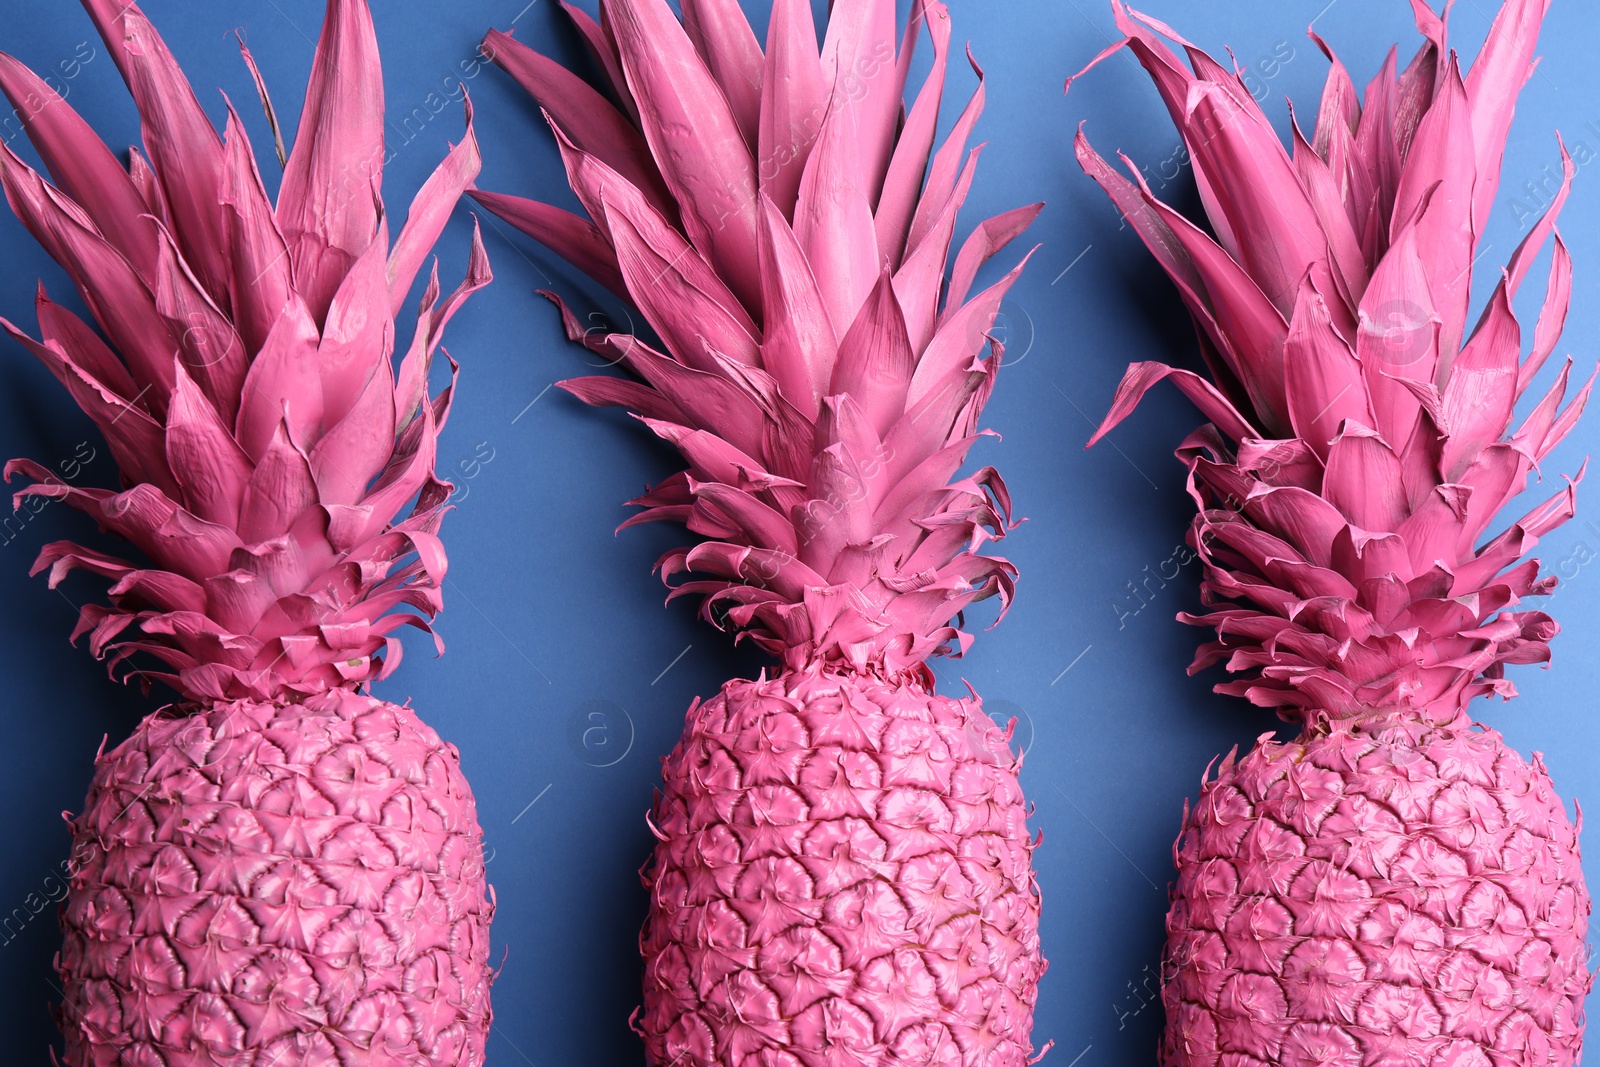 Photo of Pink pineapples on blue background, flat lay. Creative concept